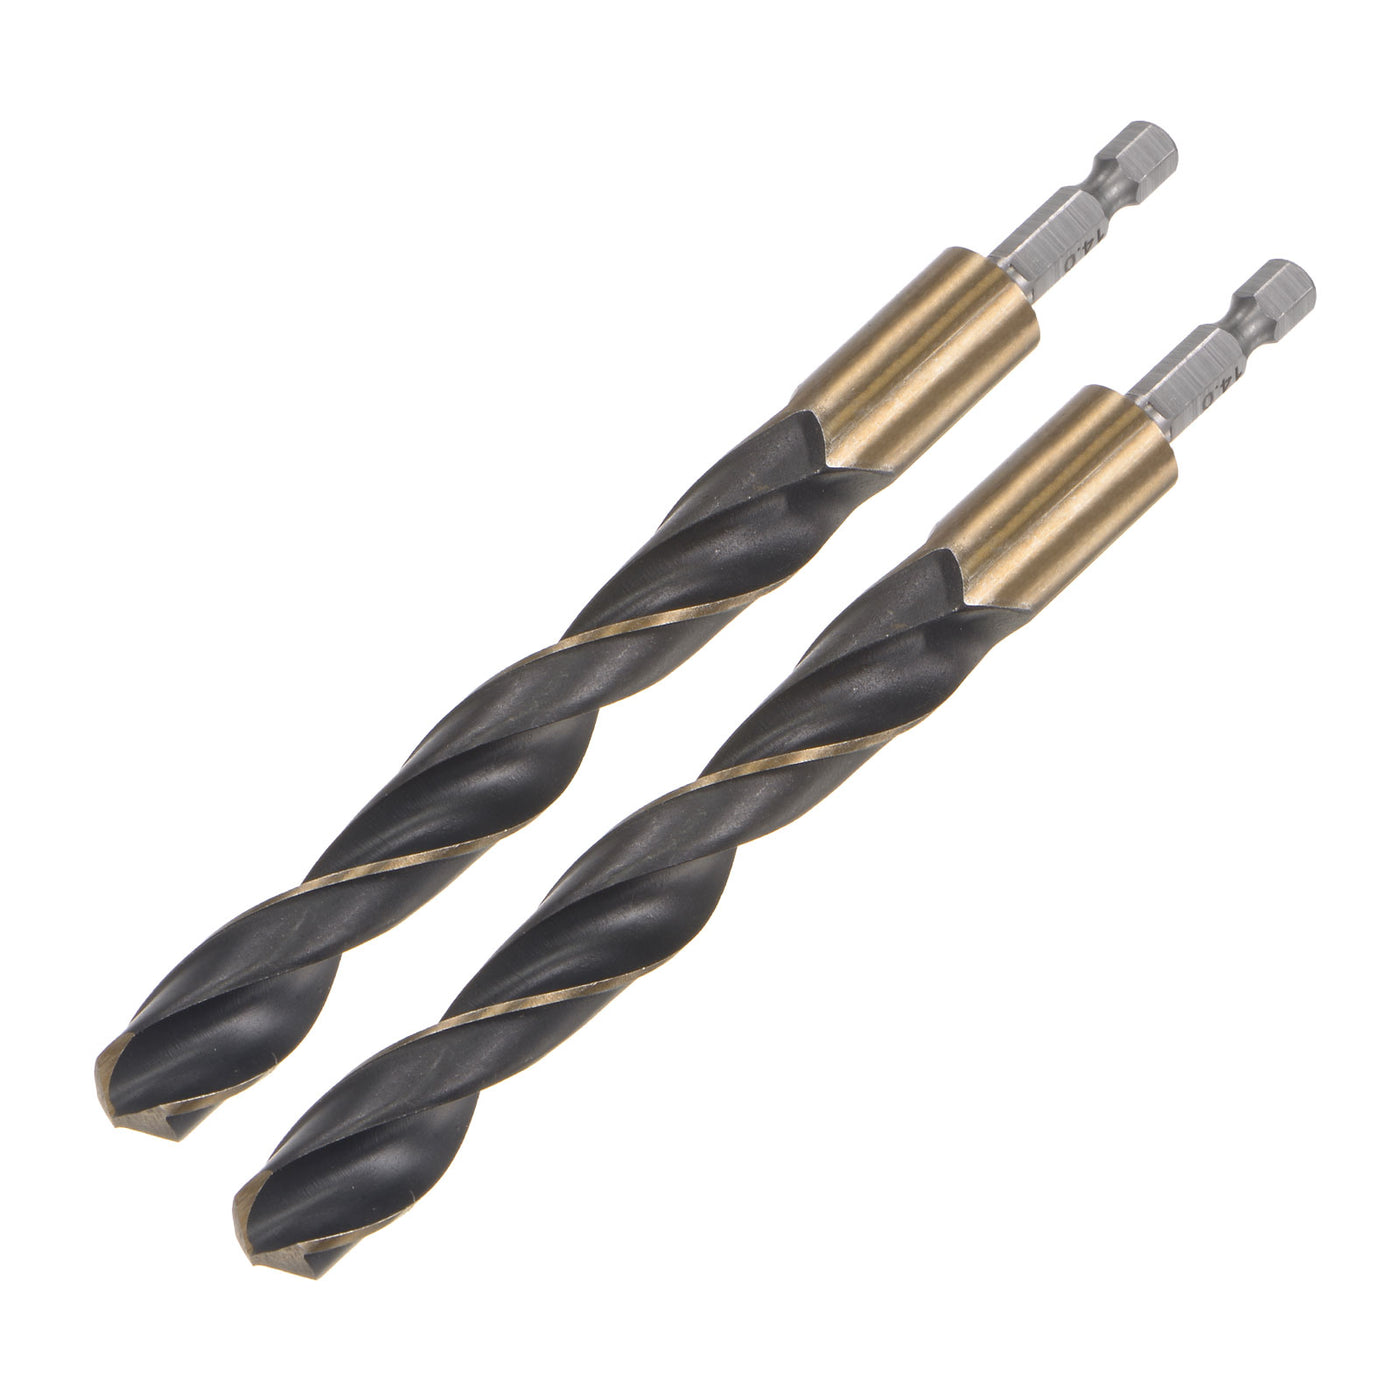 uxcell Uxcell 2Pcs 14mm High Speed Steel Twist Drill Bit with Hex Shank 156mm Length